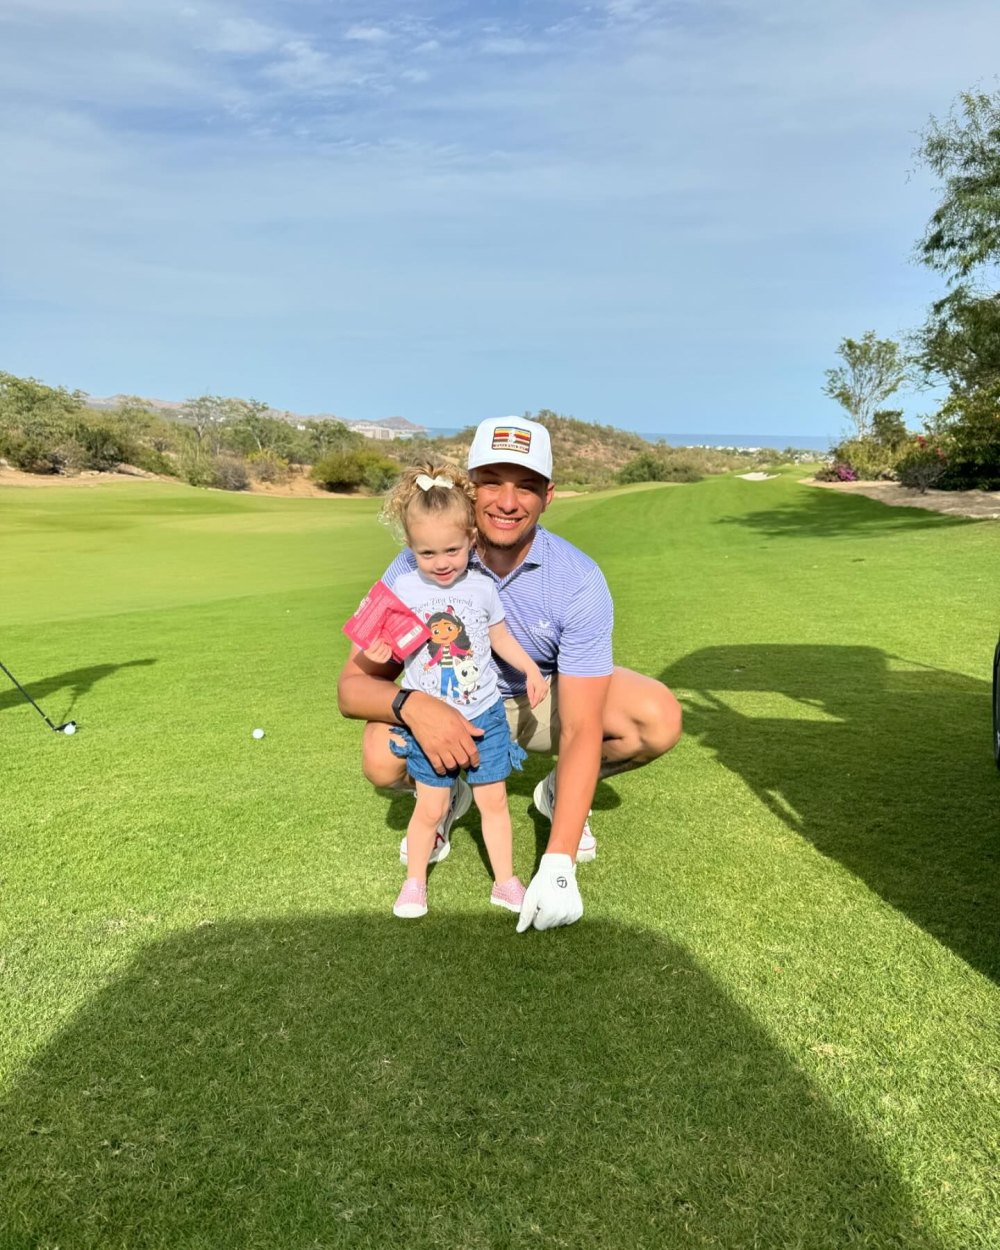 Patrick and Brittany Mahomes Tropical Vacay Included Golfing With the Kids